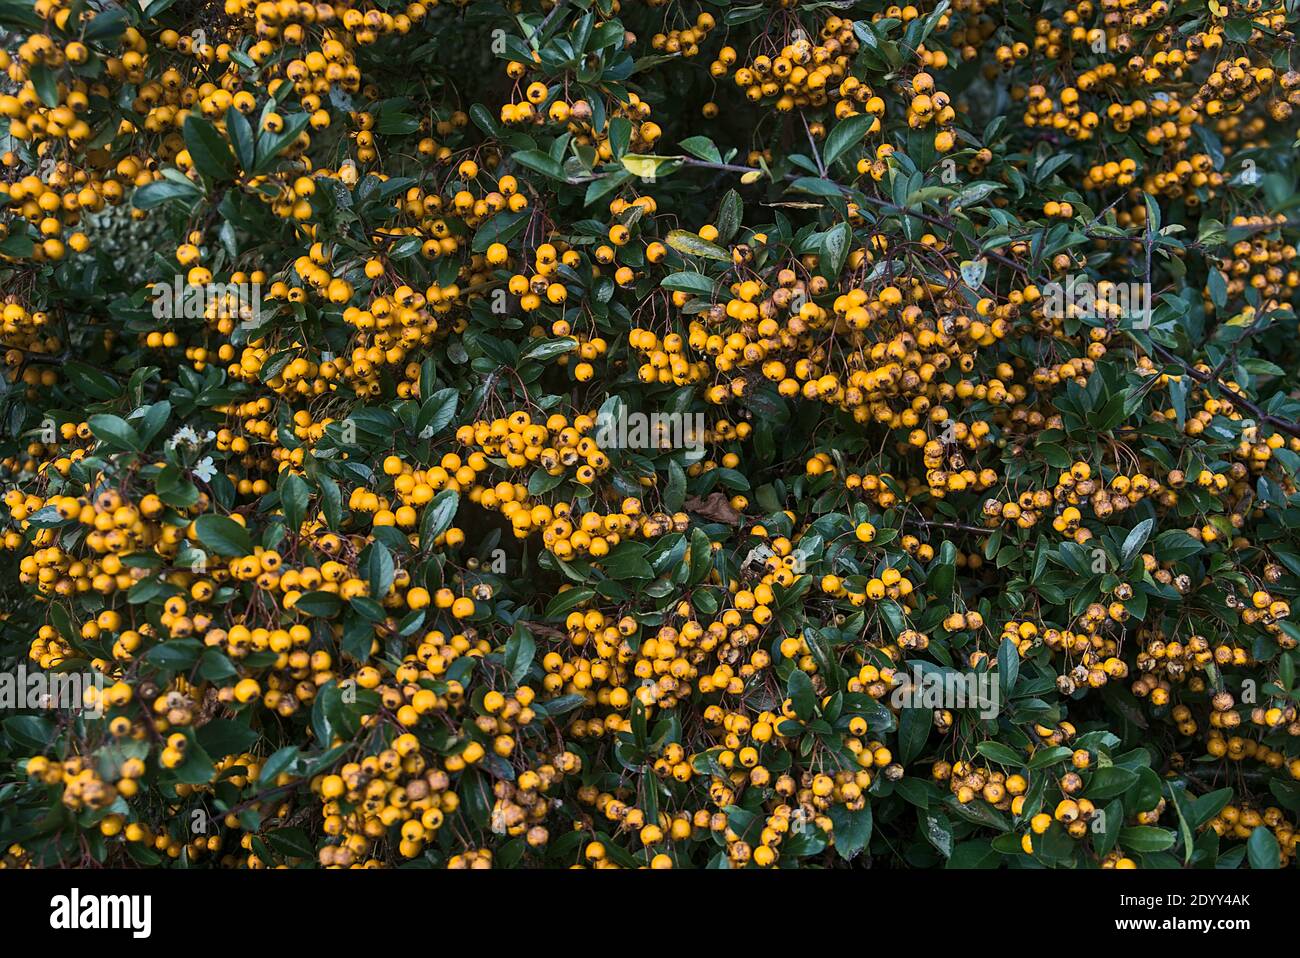 Beautiful background of late autumn yellow berries of golden firethorn (Pyracantha coccinea, Golden Charmer) shrub with dark green leaves, Dublin Stock Photo